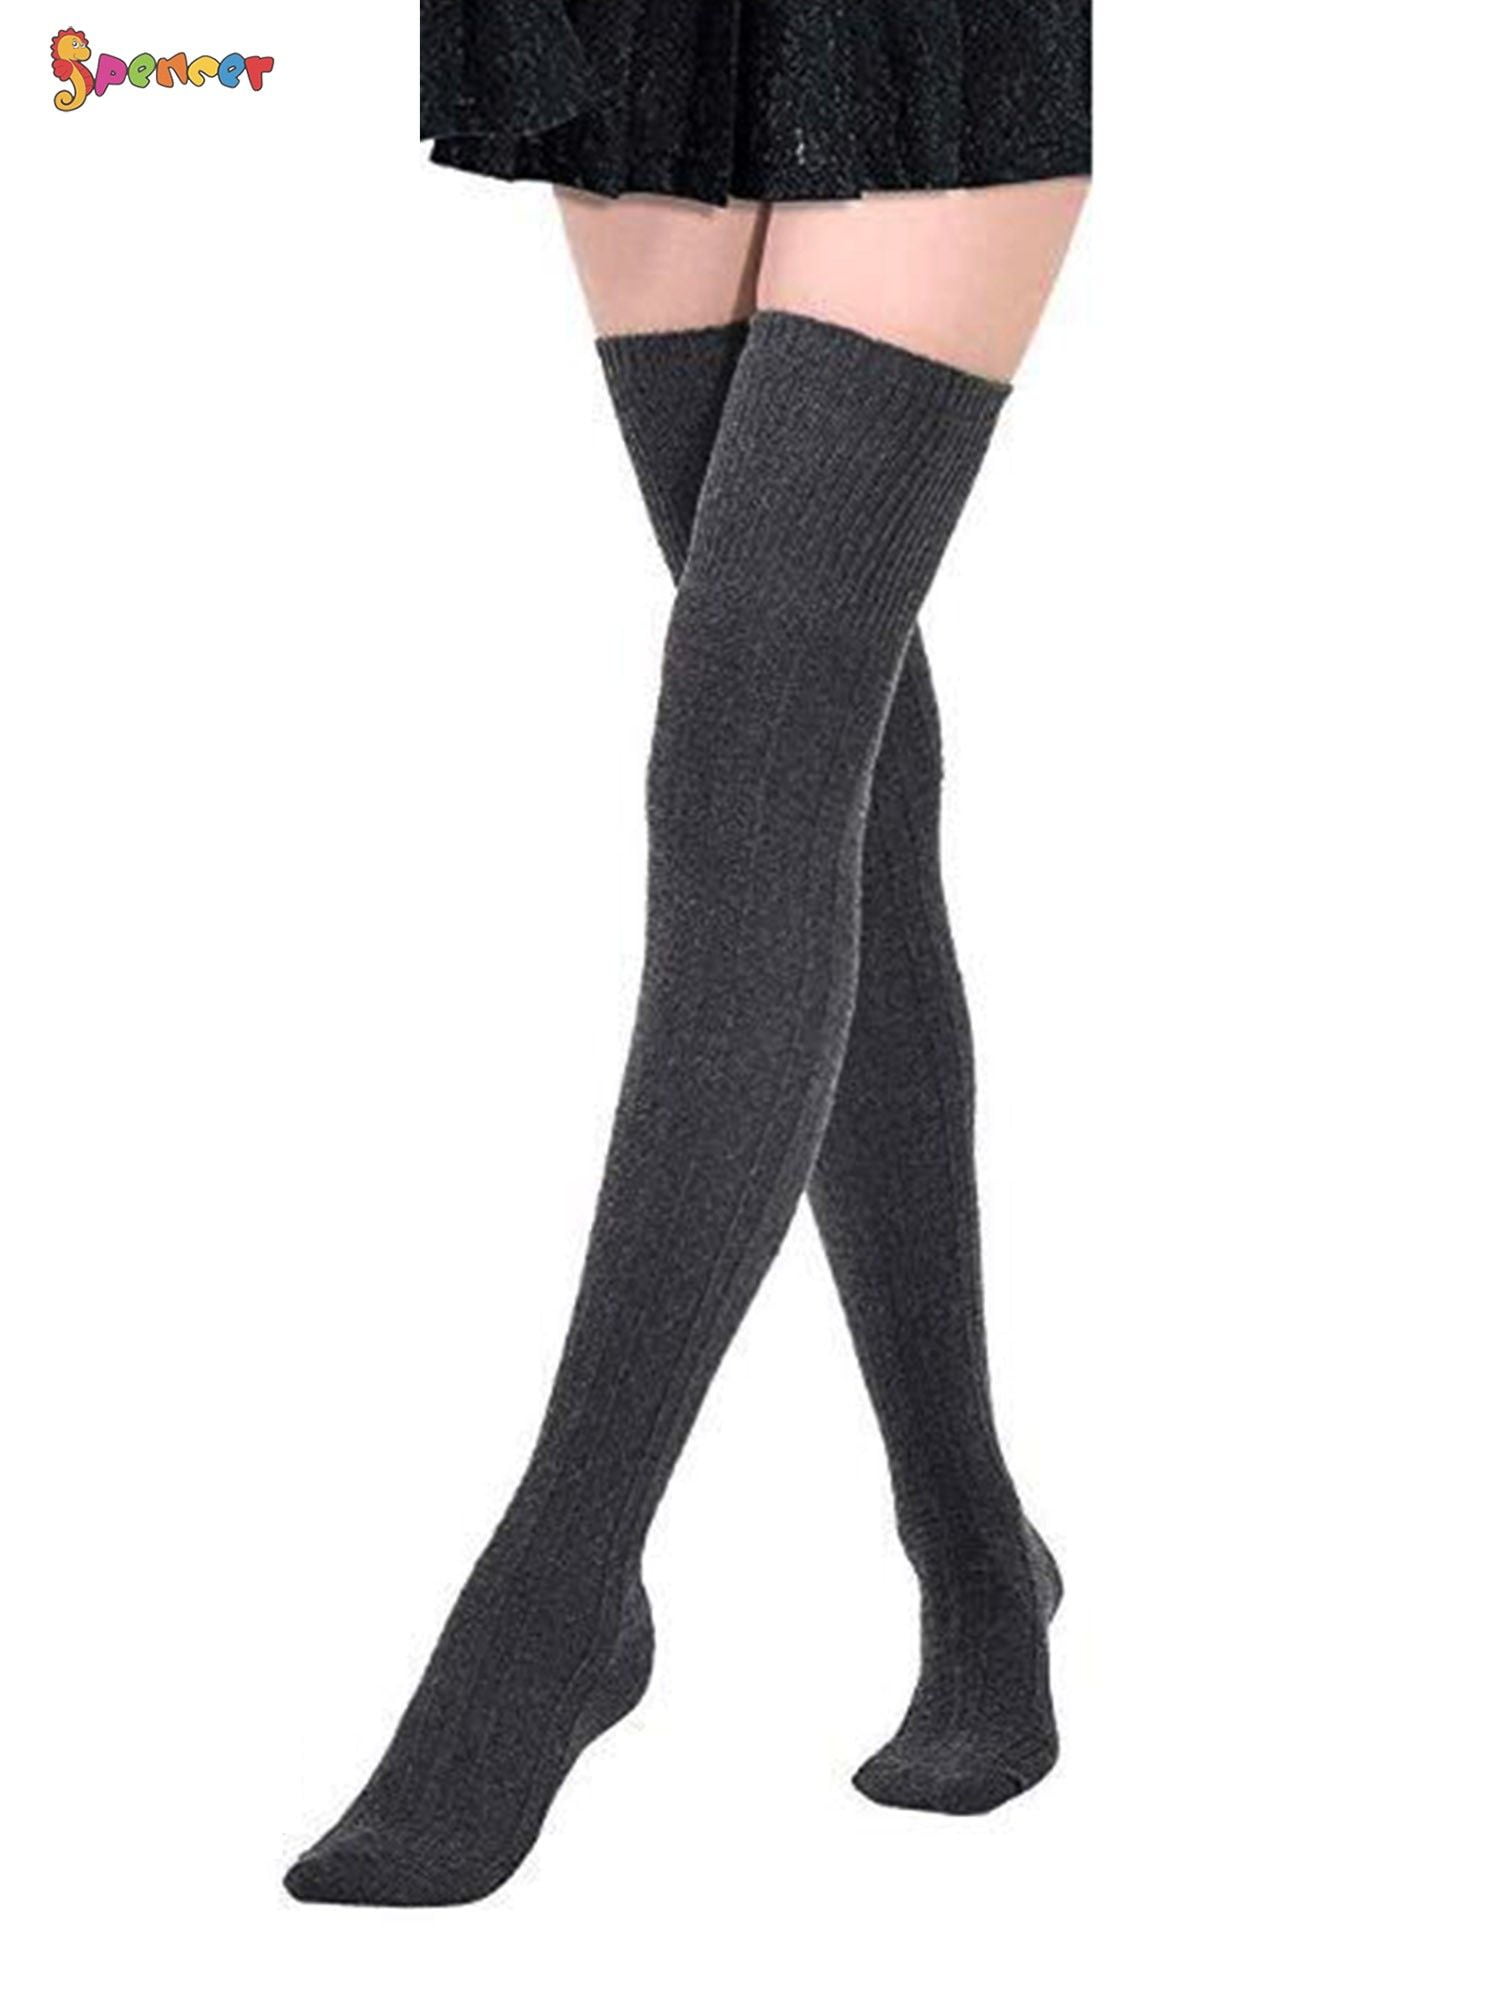 Gaoport 6 Pairs Womens Over Knee Thigh High Socks Warm Long Stockings Boot Leg Warmer for Women Girls Daily Wear Cosplay